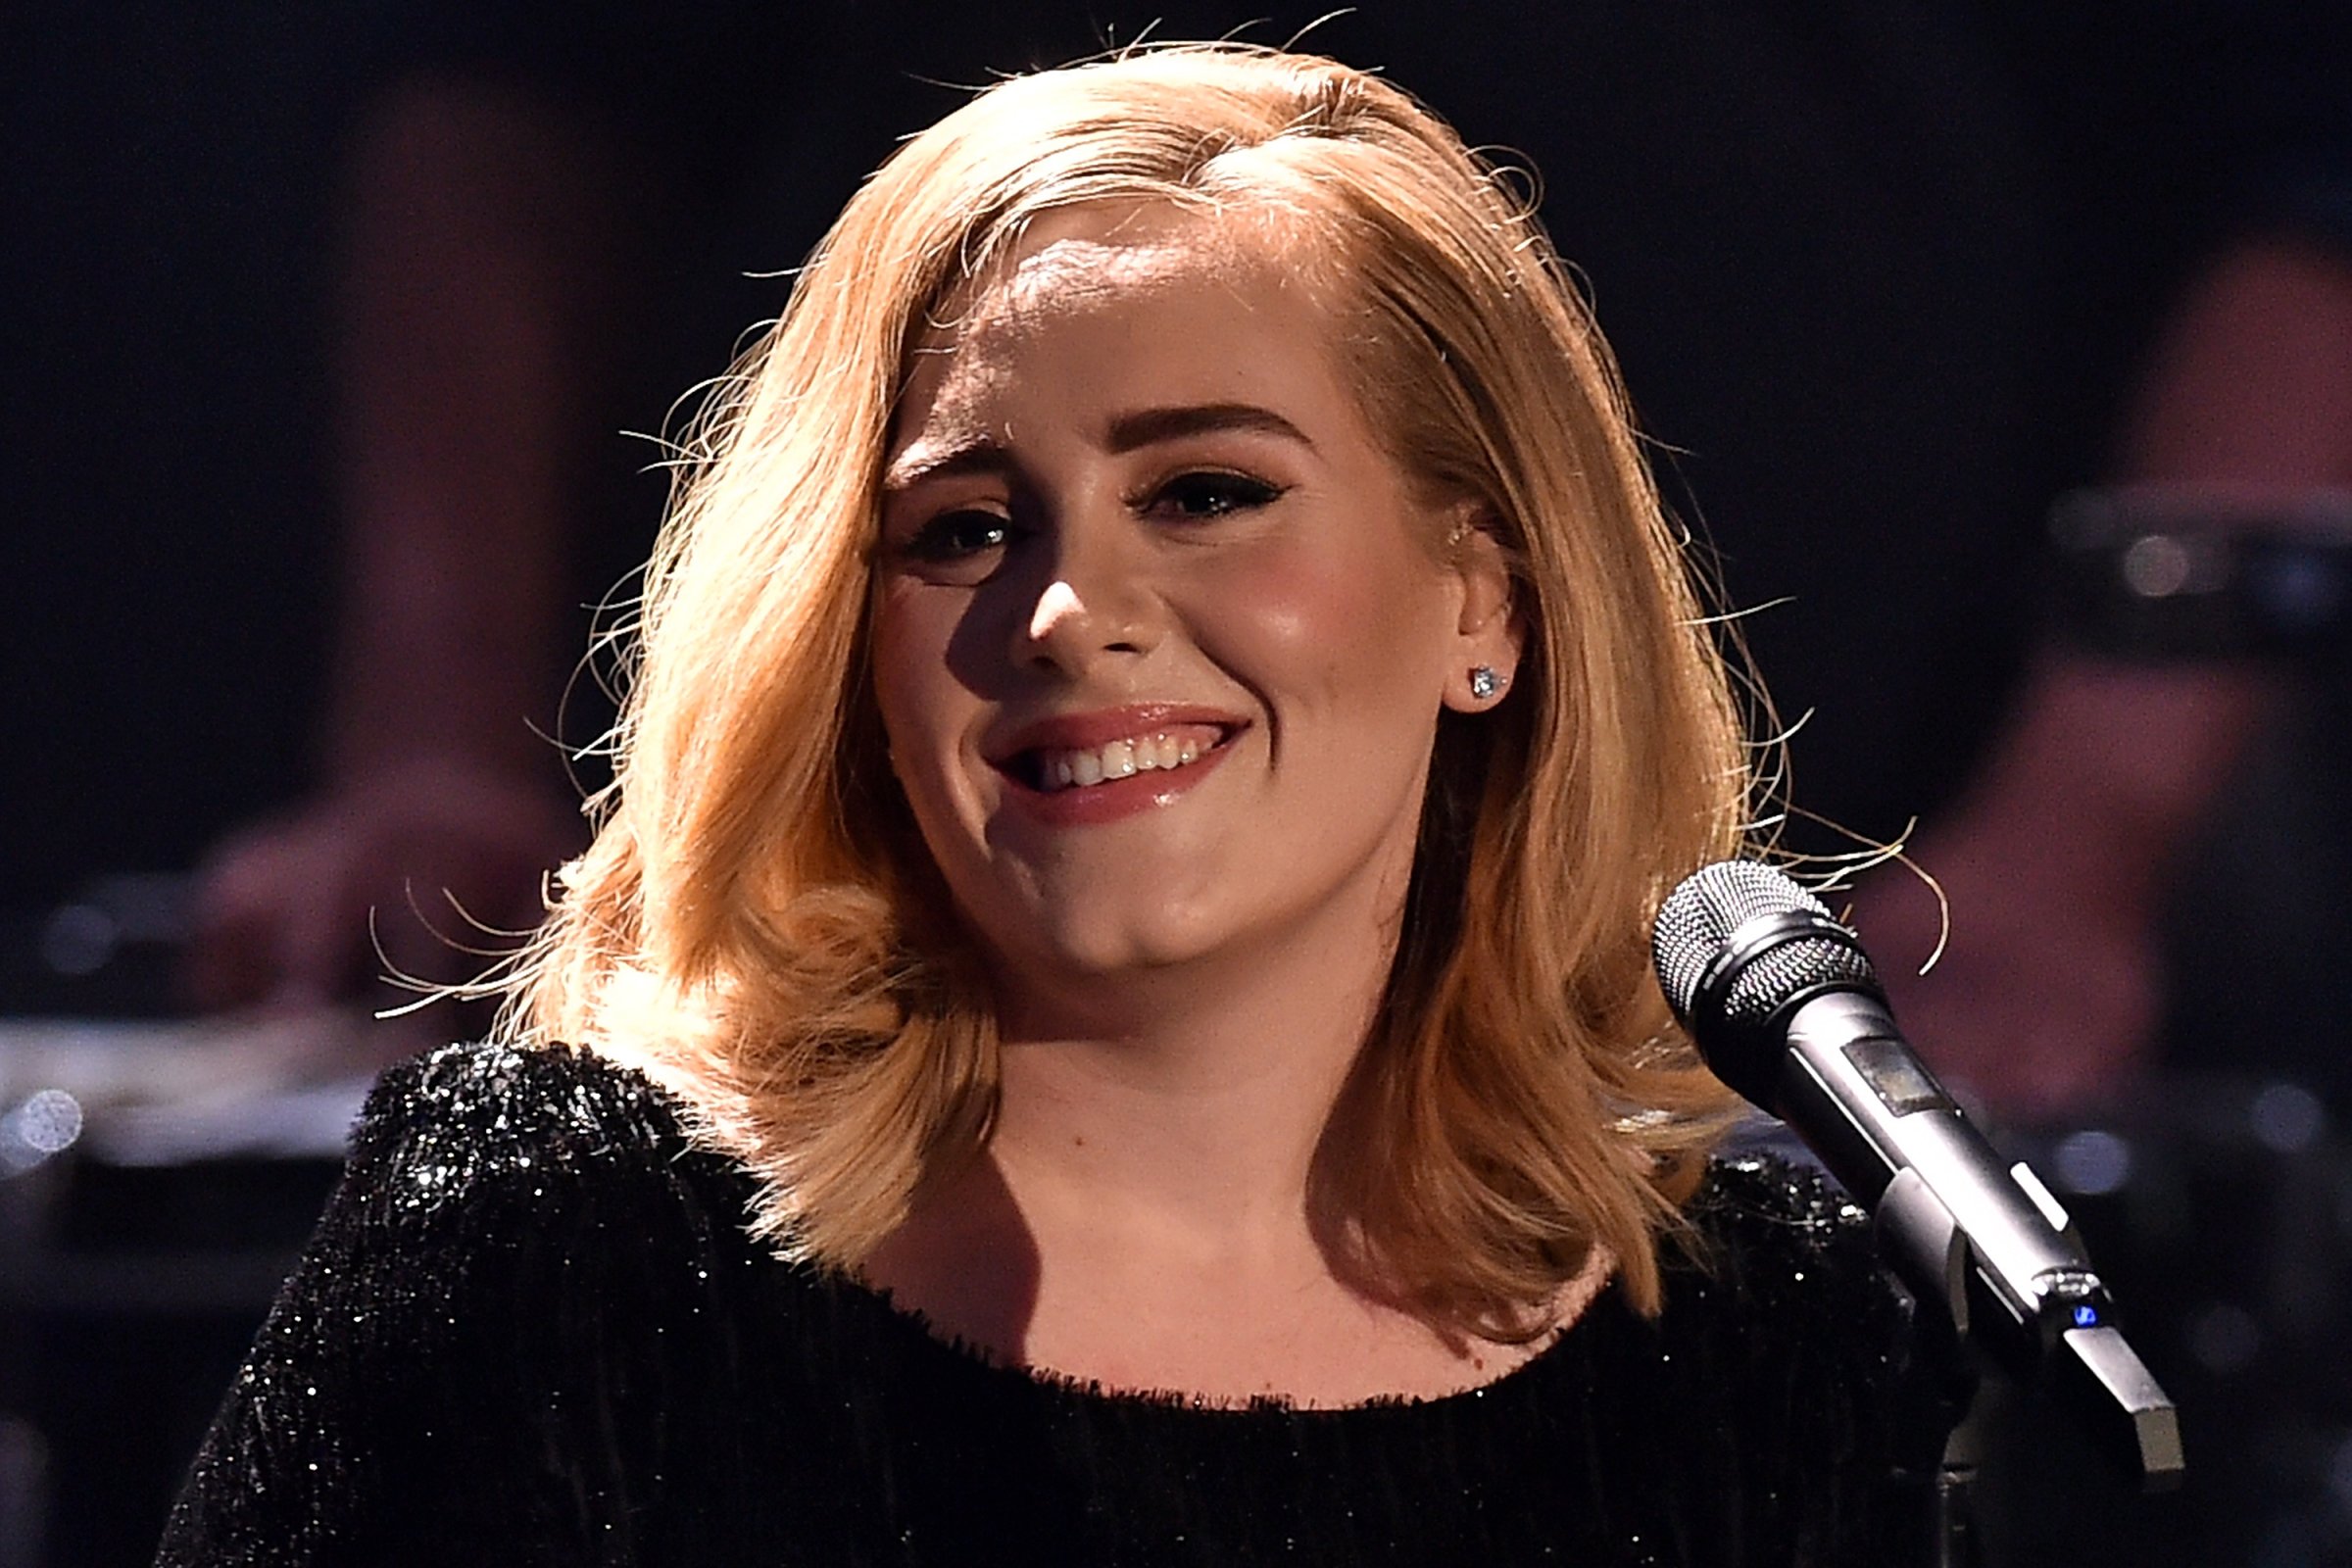 Adele performs on television in Cologne, Germany on Dec. 6, 2015.